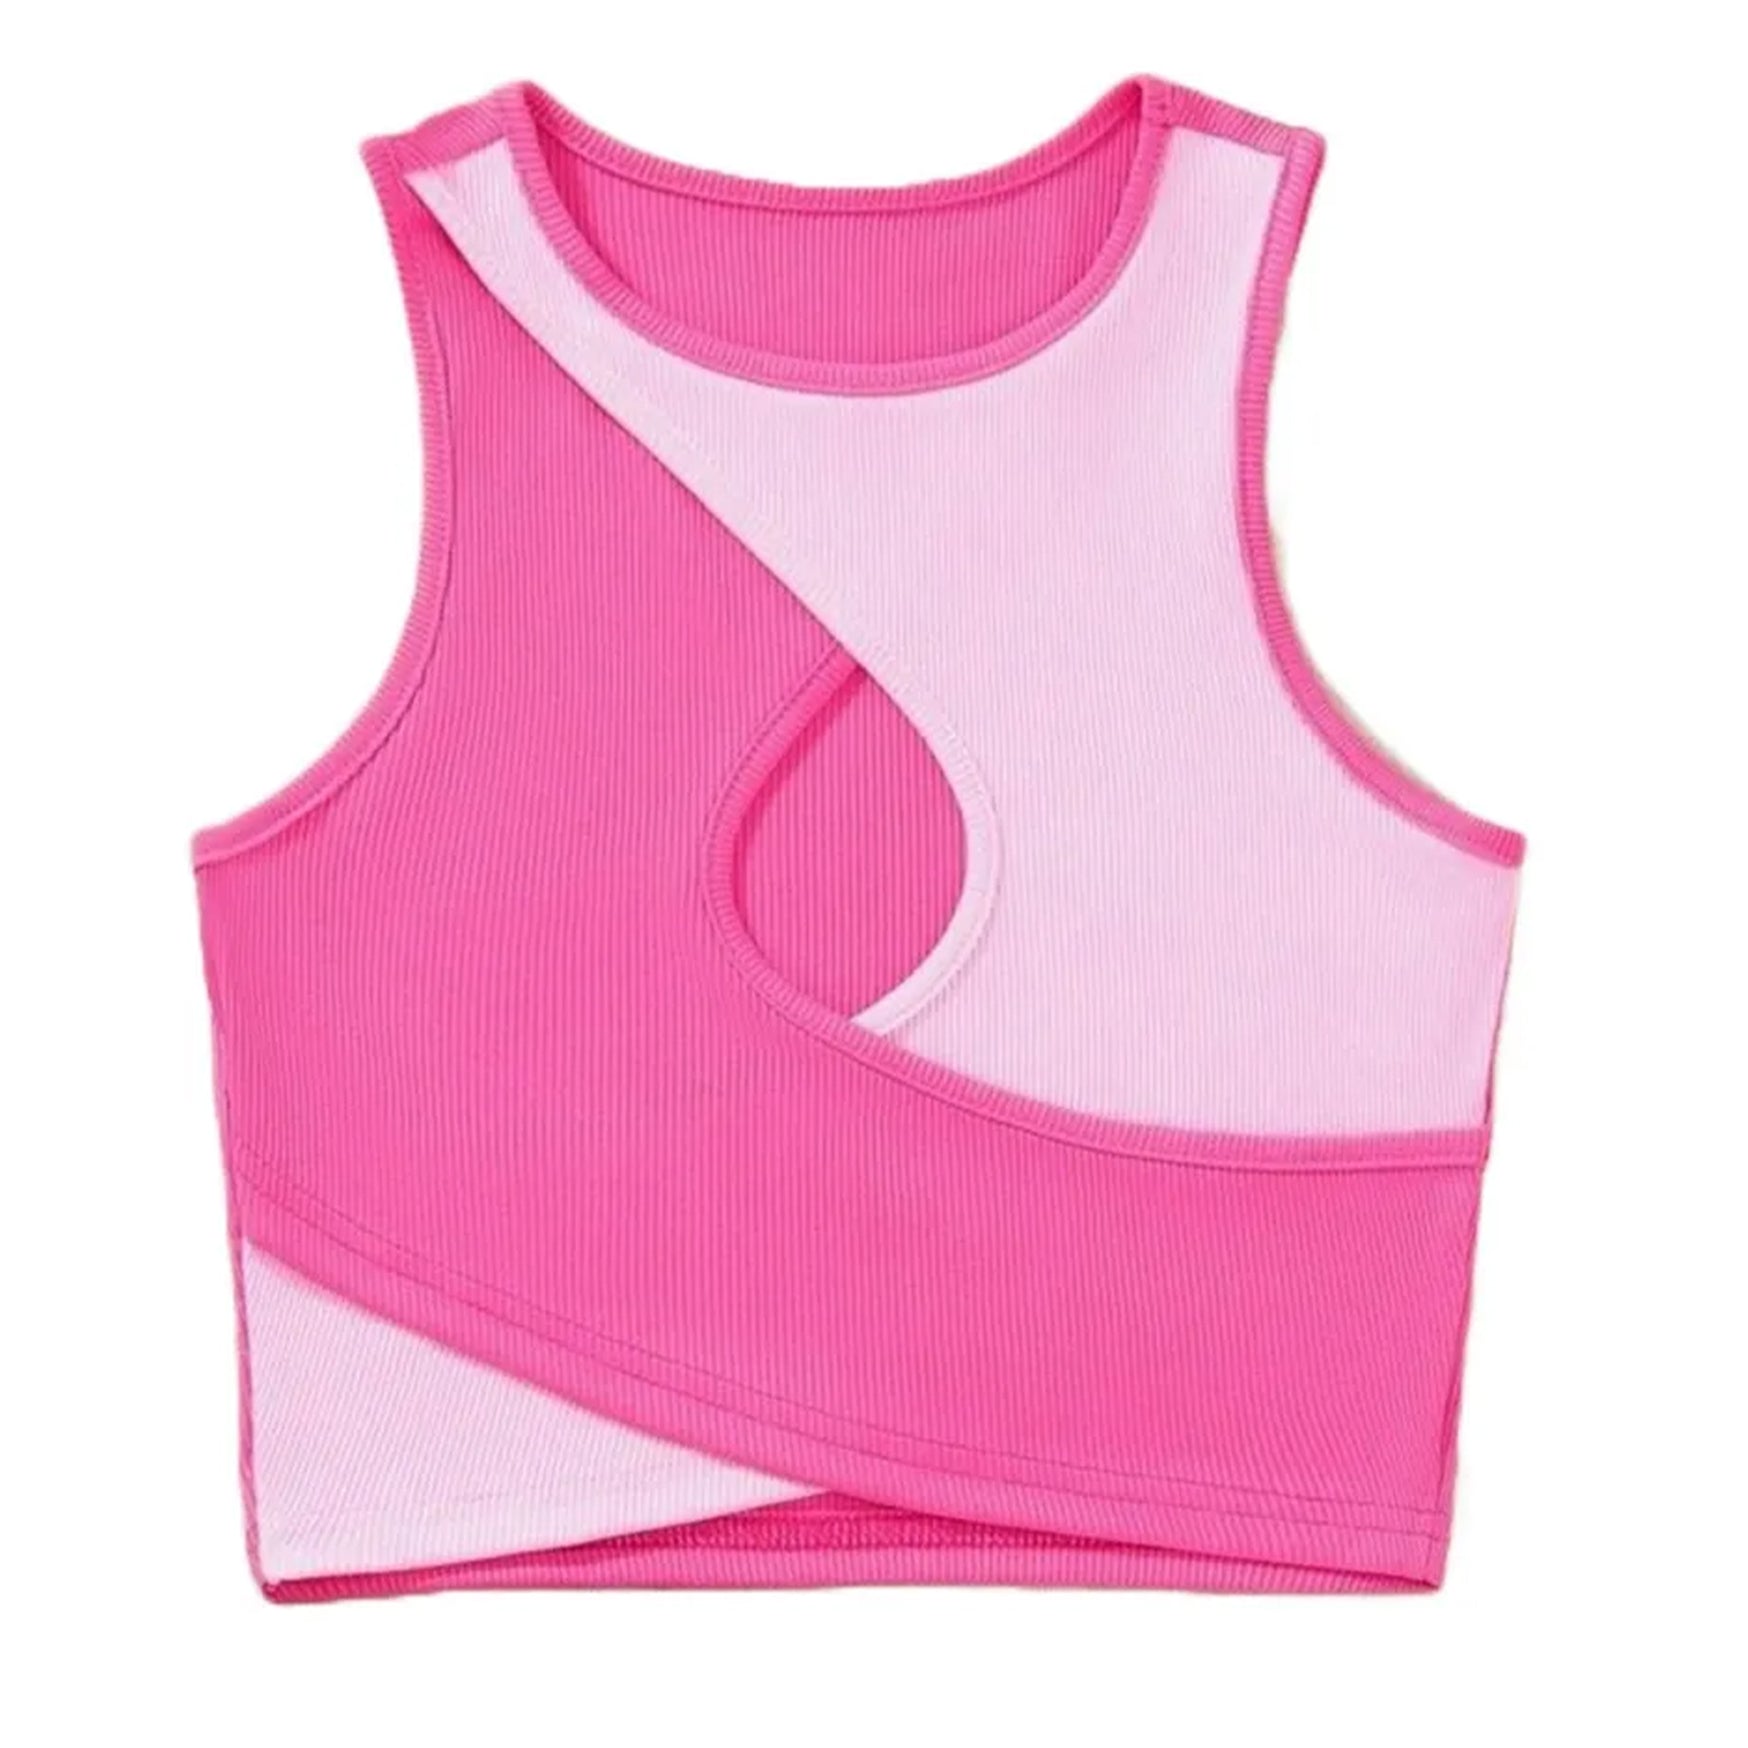 Khhalisi Pink Crop Tops for Womens (M)